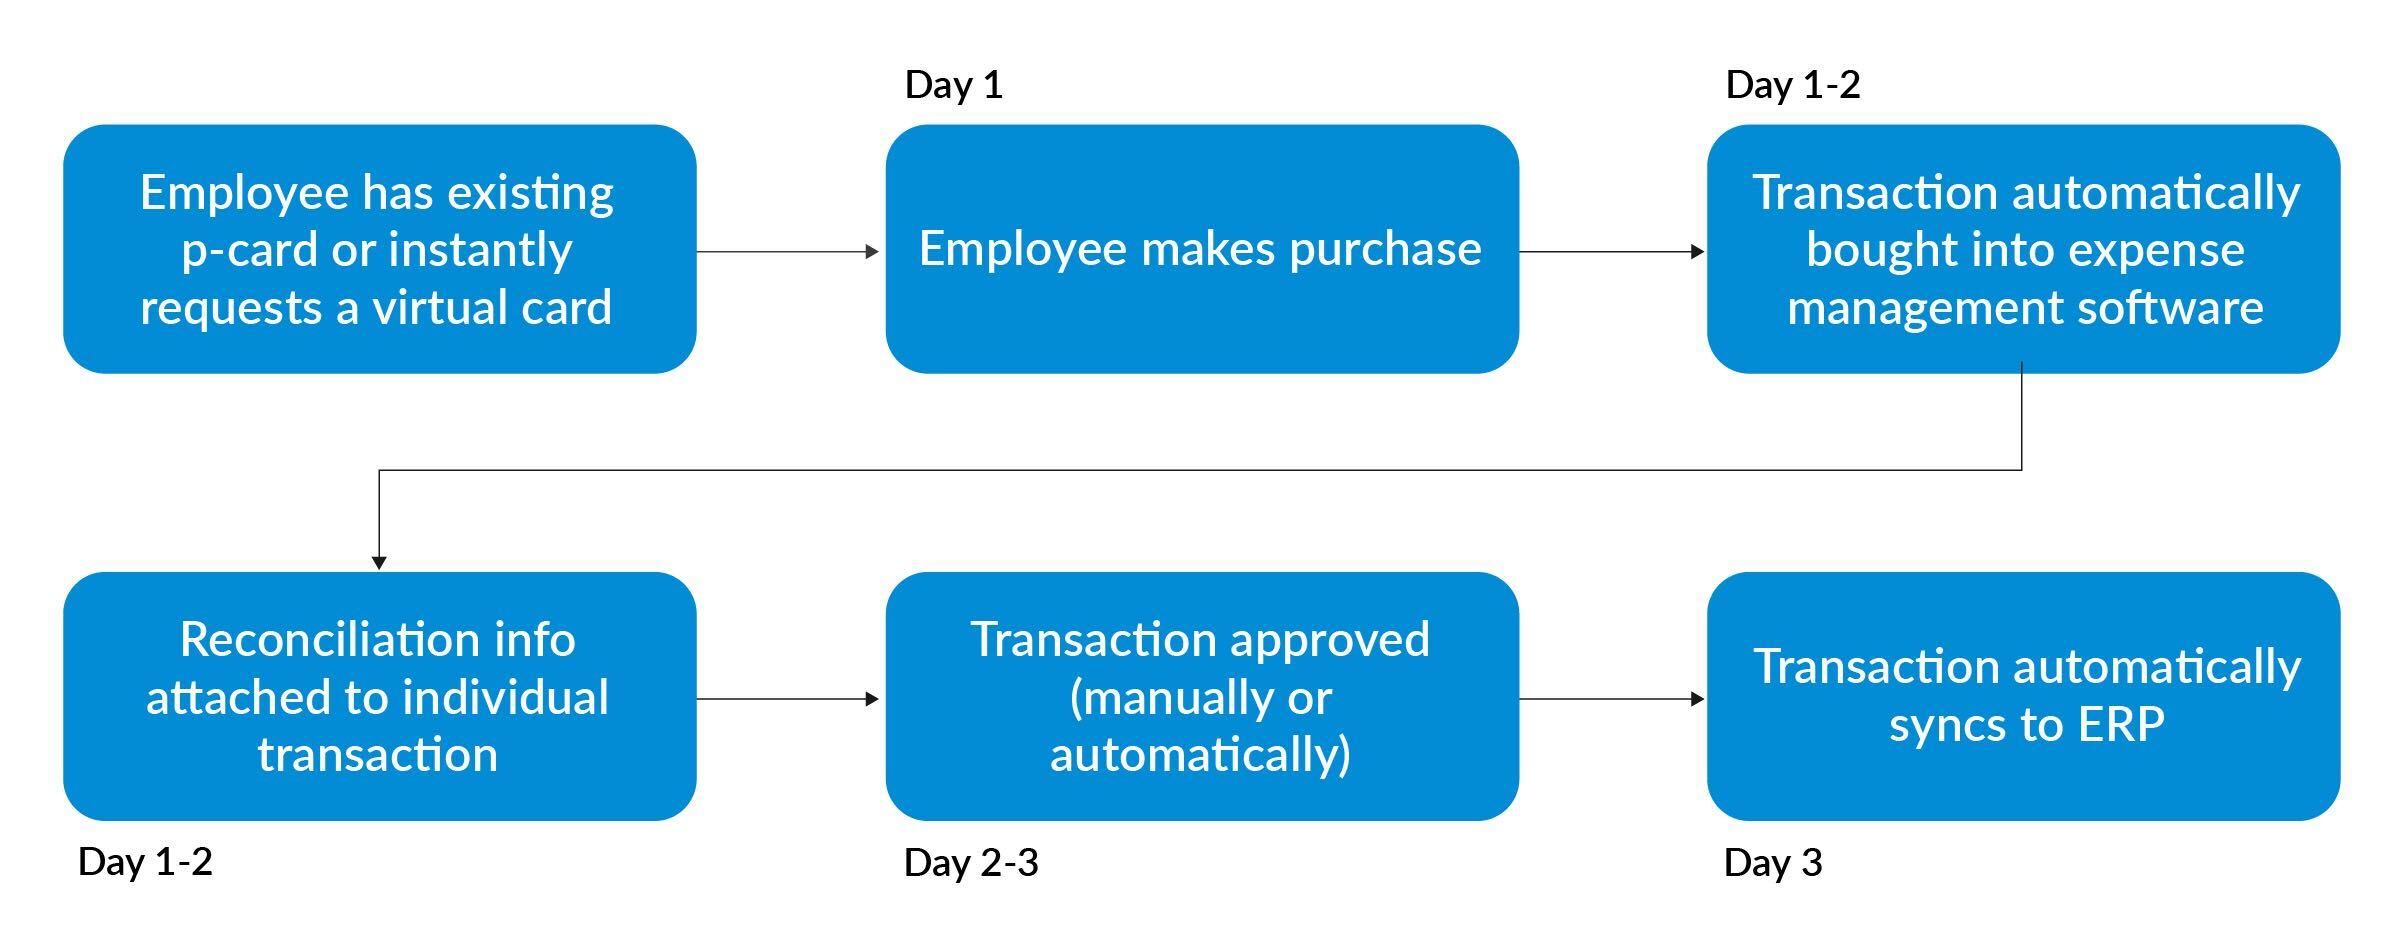 Flowchart of how long it takes to manage p-card transactions with expense management software